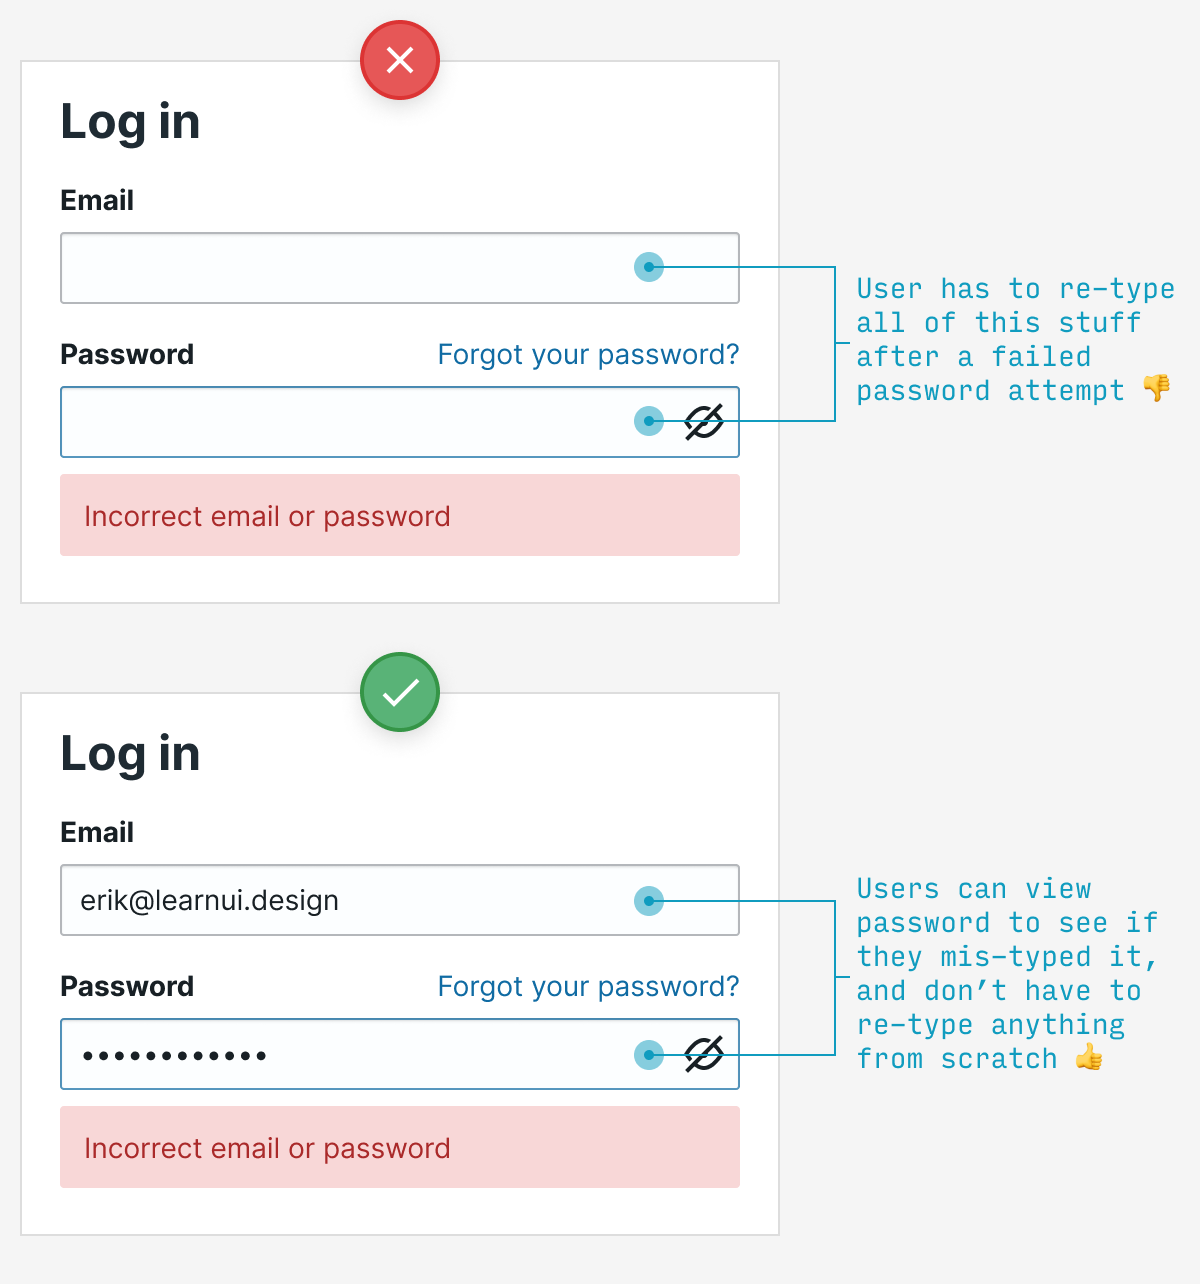 remember password attempt after incorrect password UX pattern